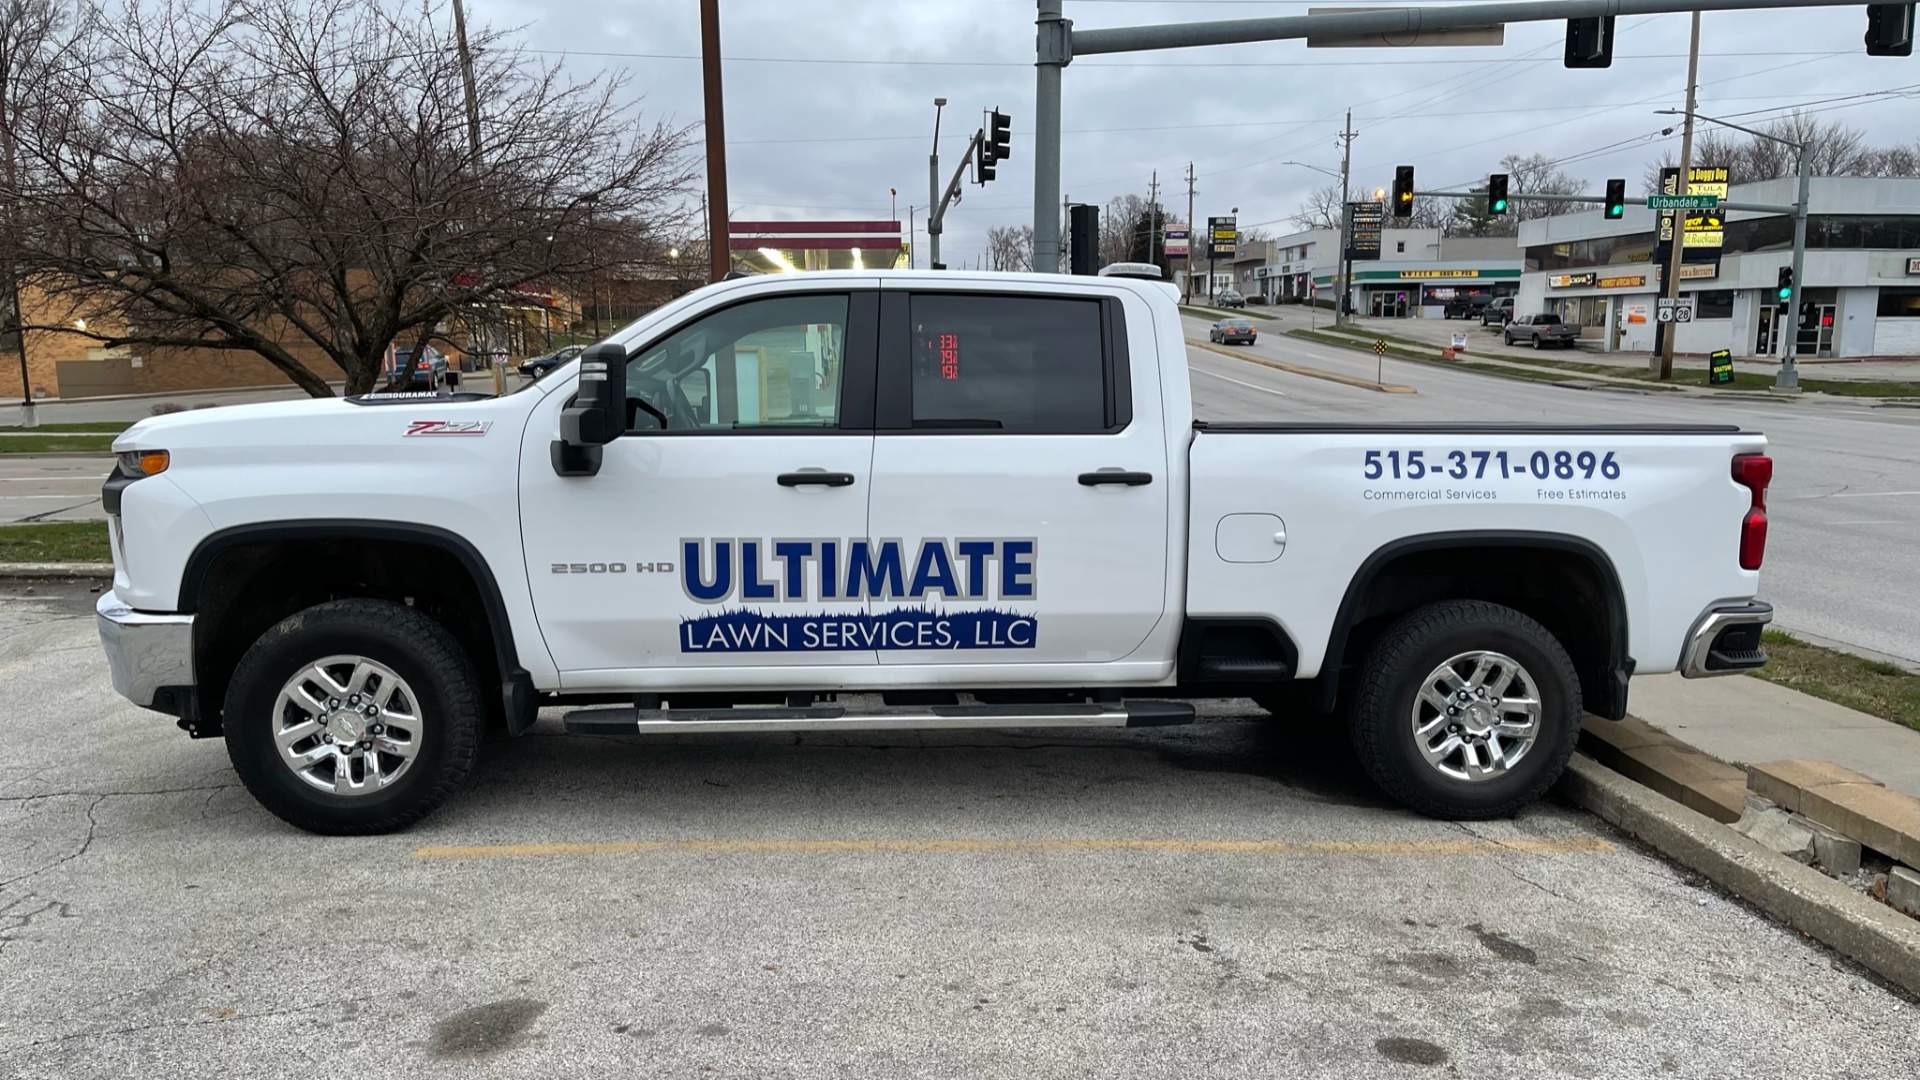 Work truck in Des Moines, IA.